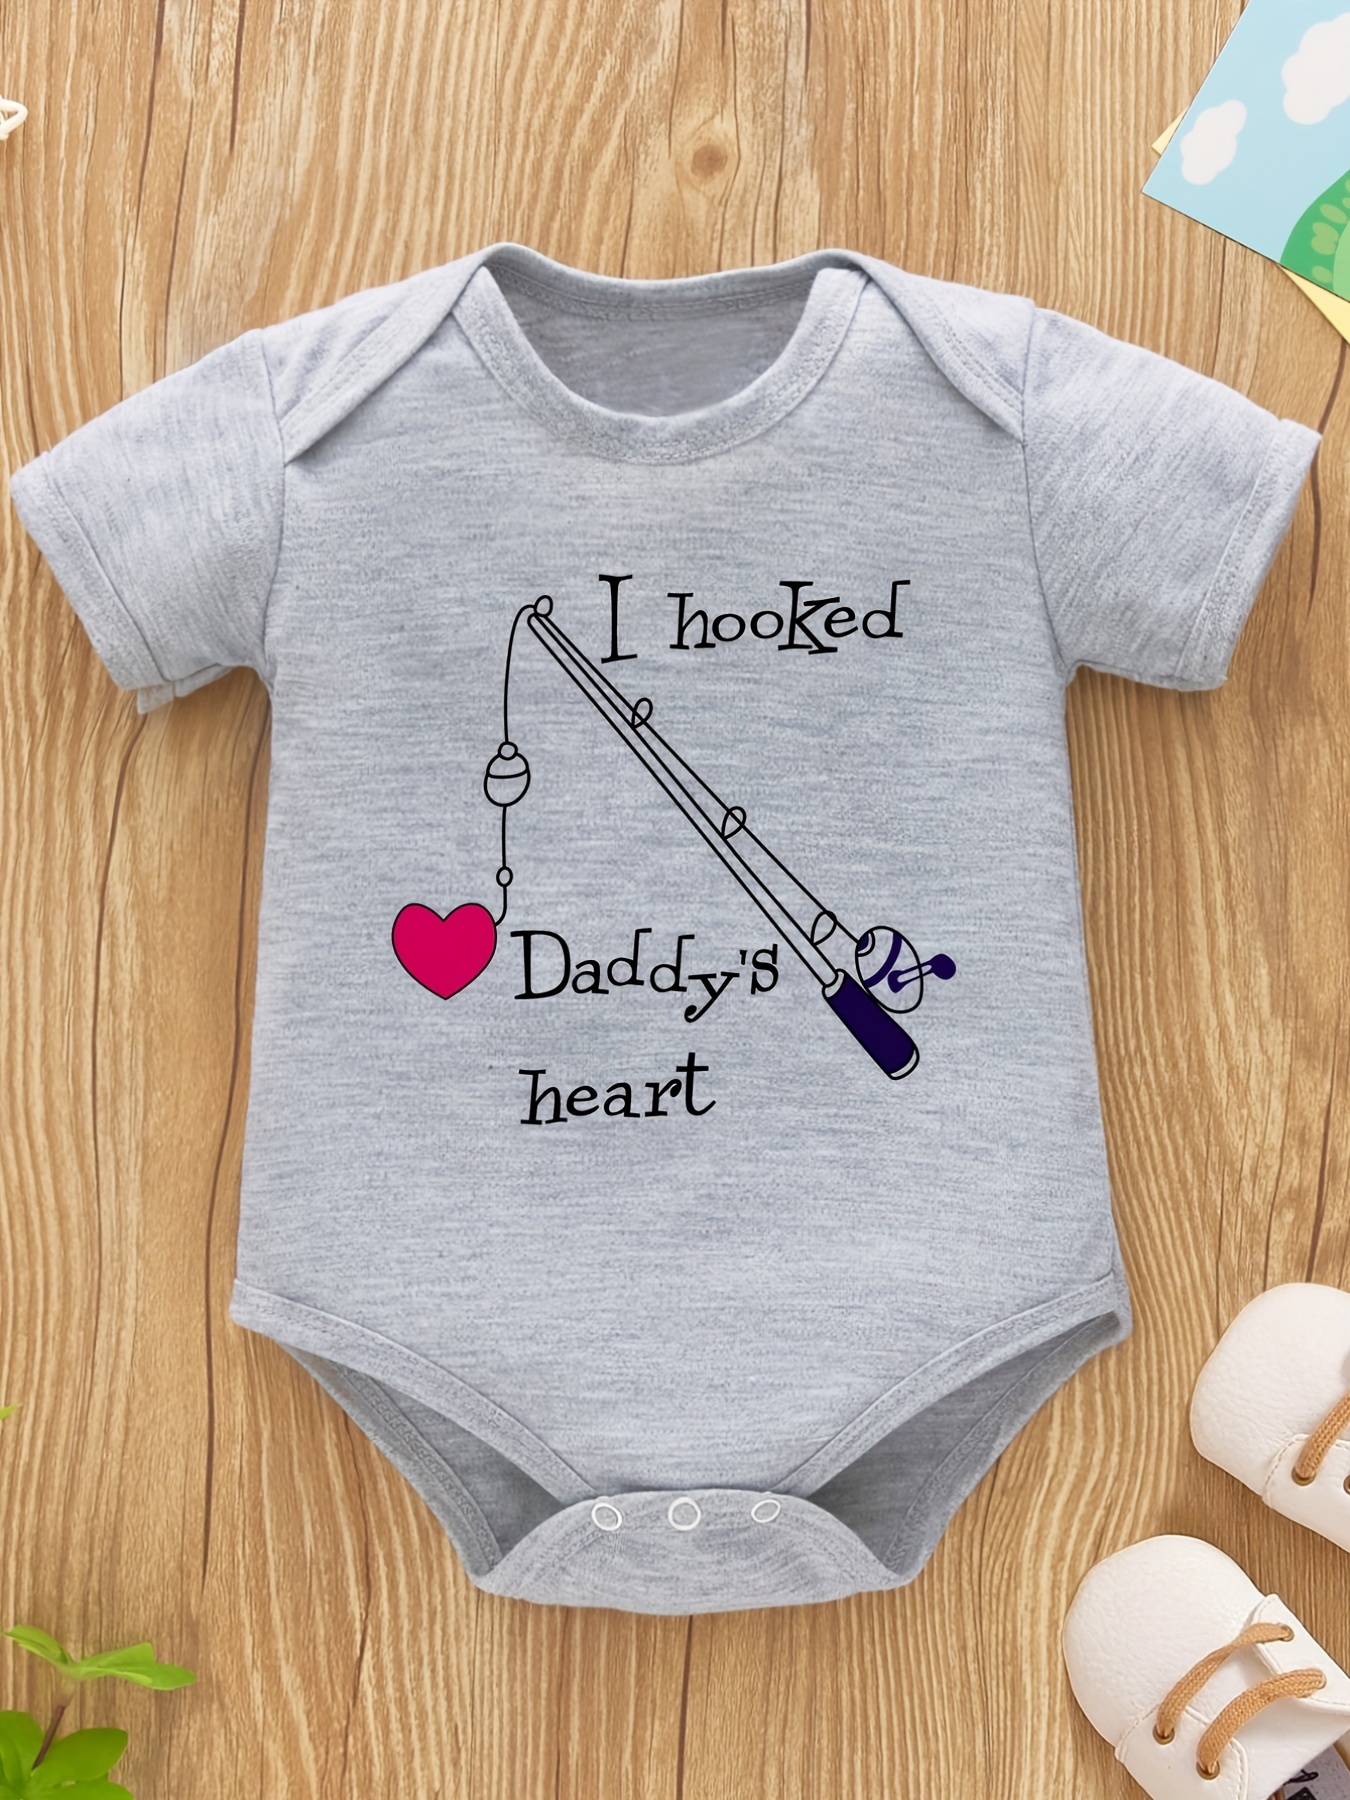 Baby Girl Hooked on Daddy bodysuit/Shirt -- Girls Fishing Outfit -- Baby  shower gift -- little girls outfit -- Daddy's Girl shirt